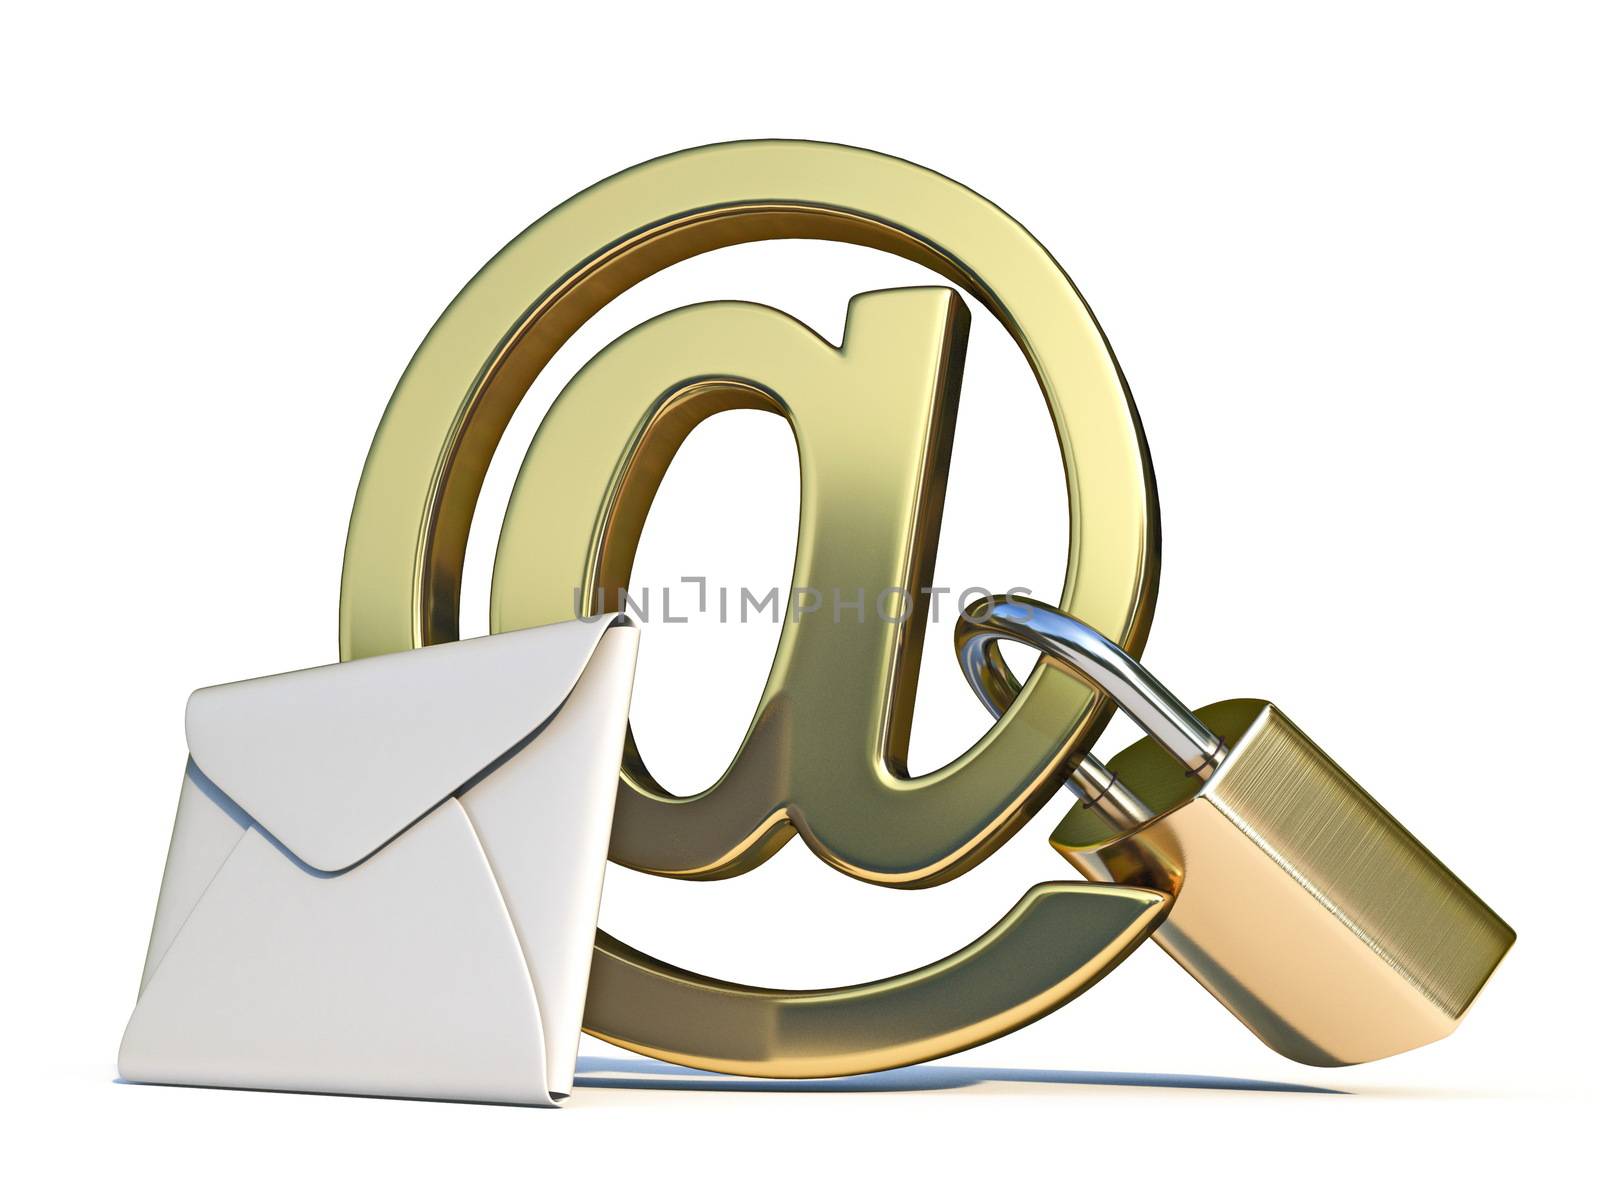 At sign and mail with padlock 3D render illustration isolated on white background